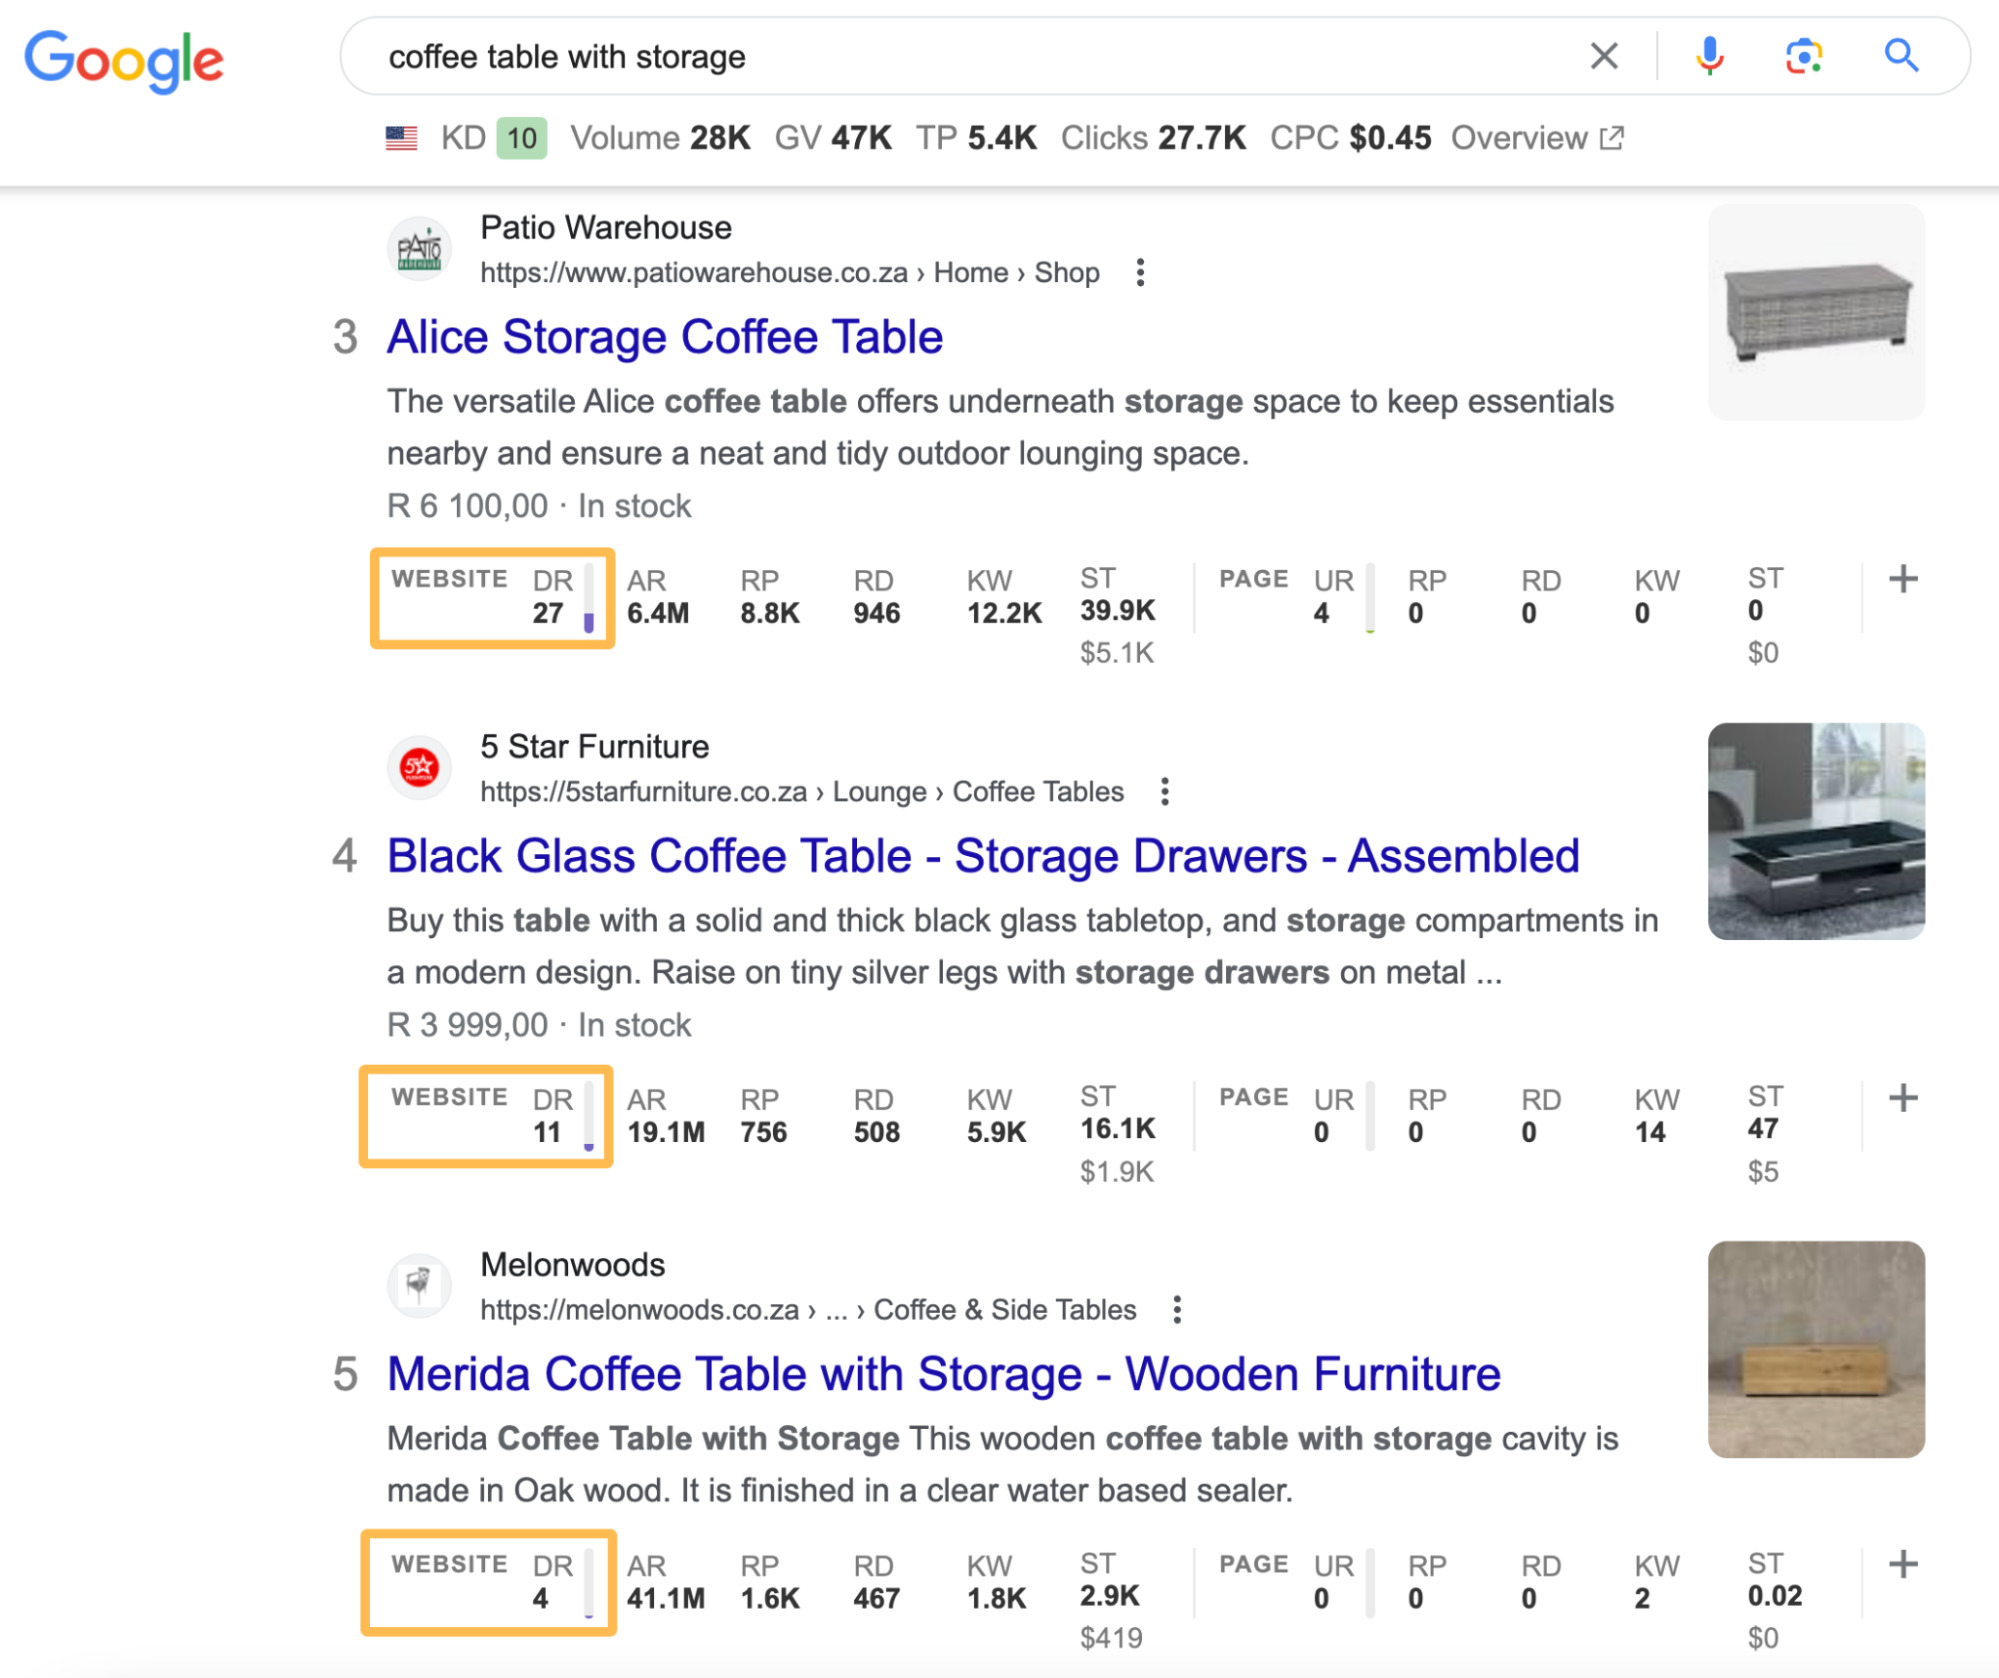 Google SERP for "coffee table with storage" s،wing DR data from Ahrefs' SEO Toolbar